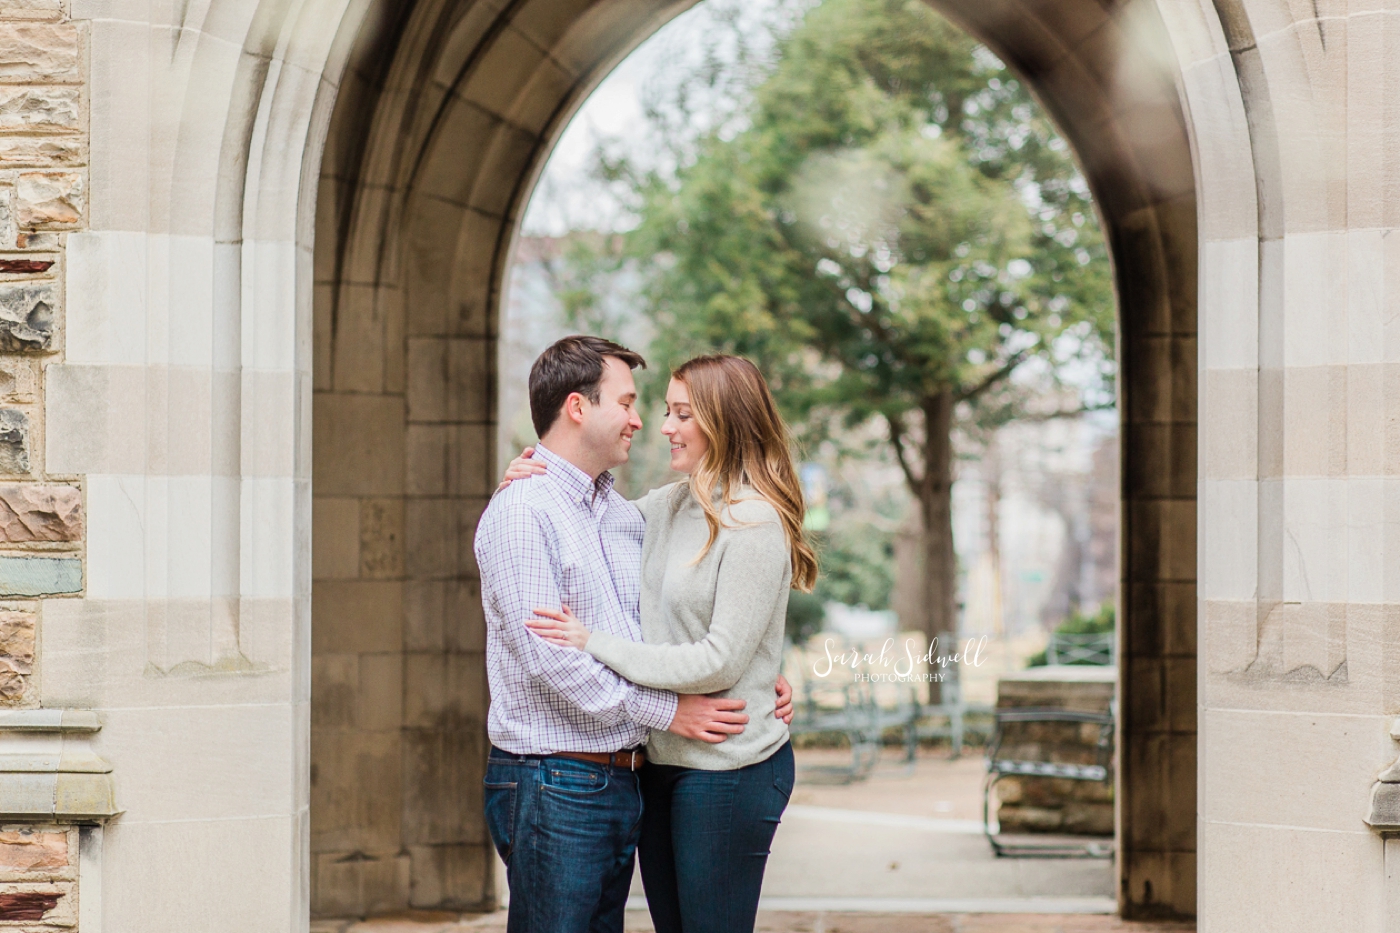 A couple share a close moment under an archway. 